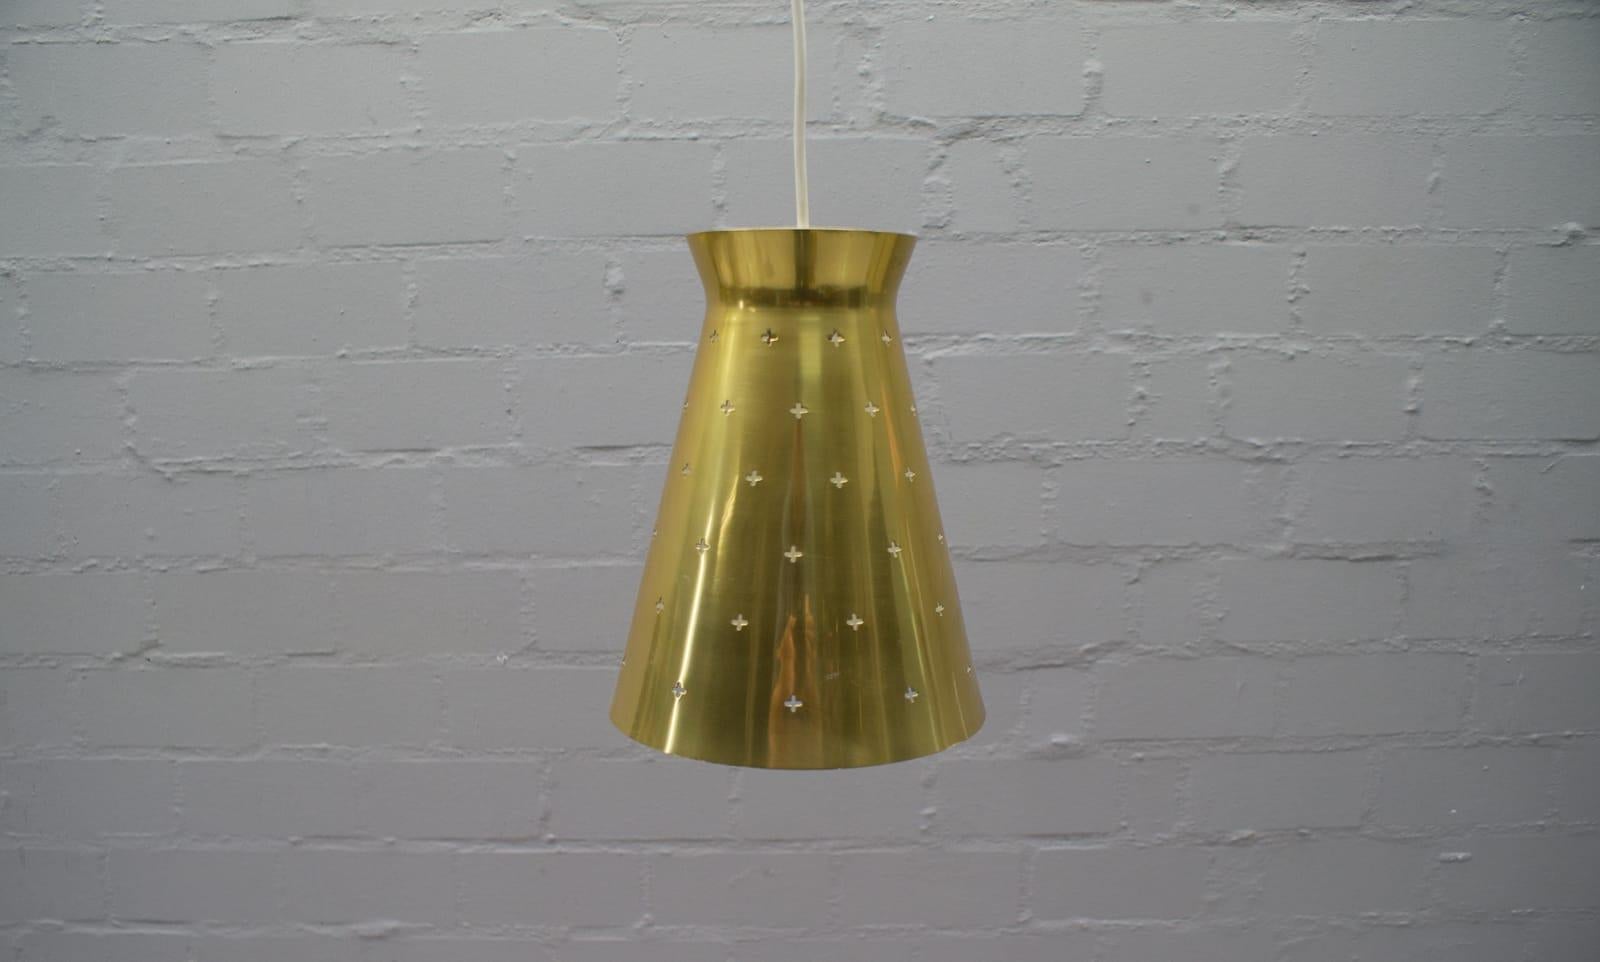 Anodized Mid-Century Modern Diabolo Pendant Lamp by Hillebrand, 1950s, Germany For Sale